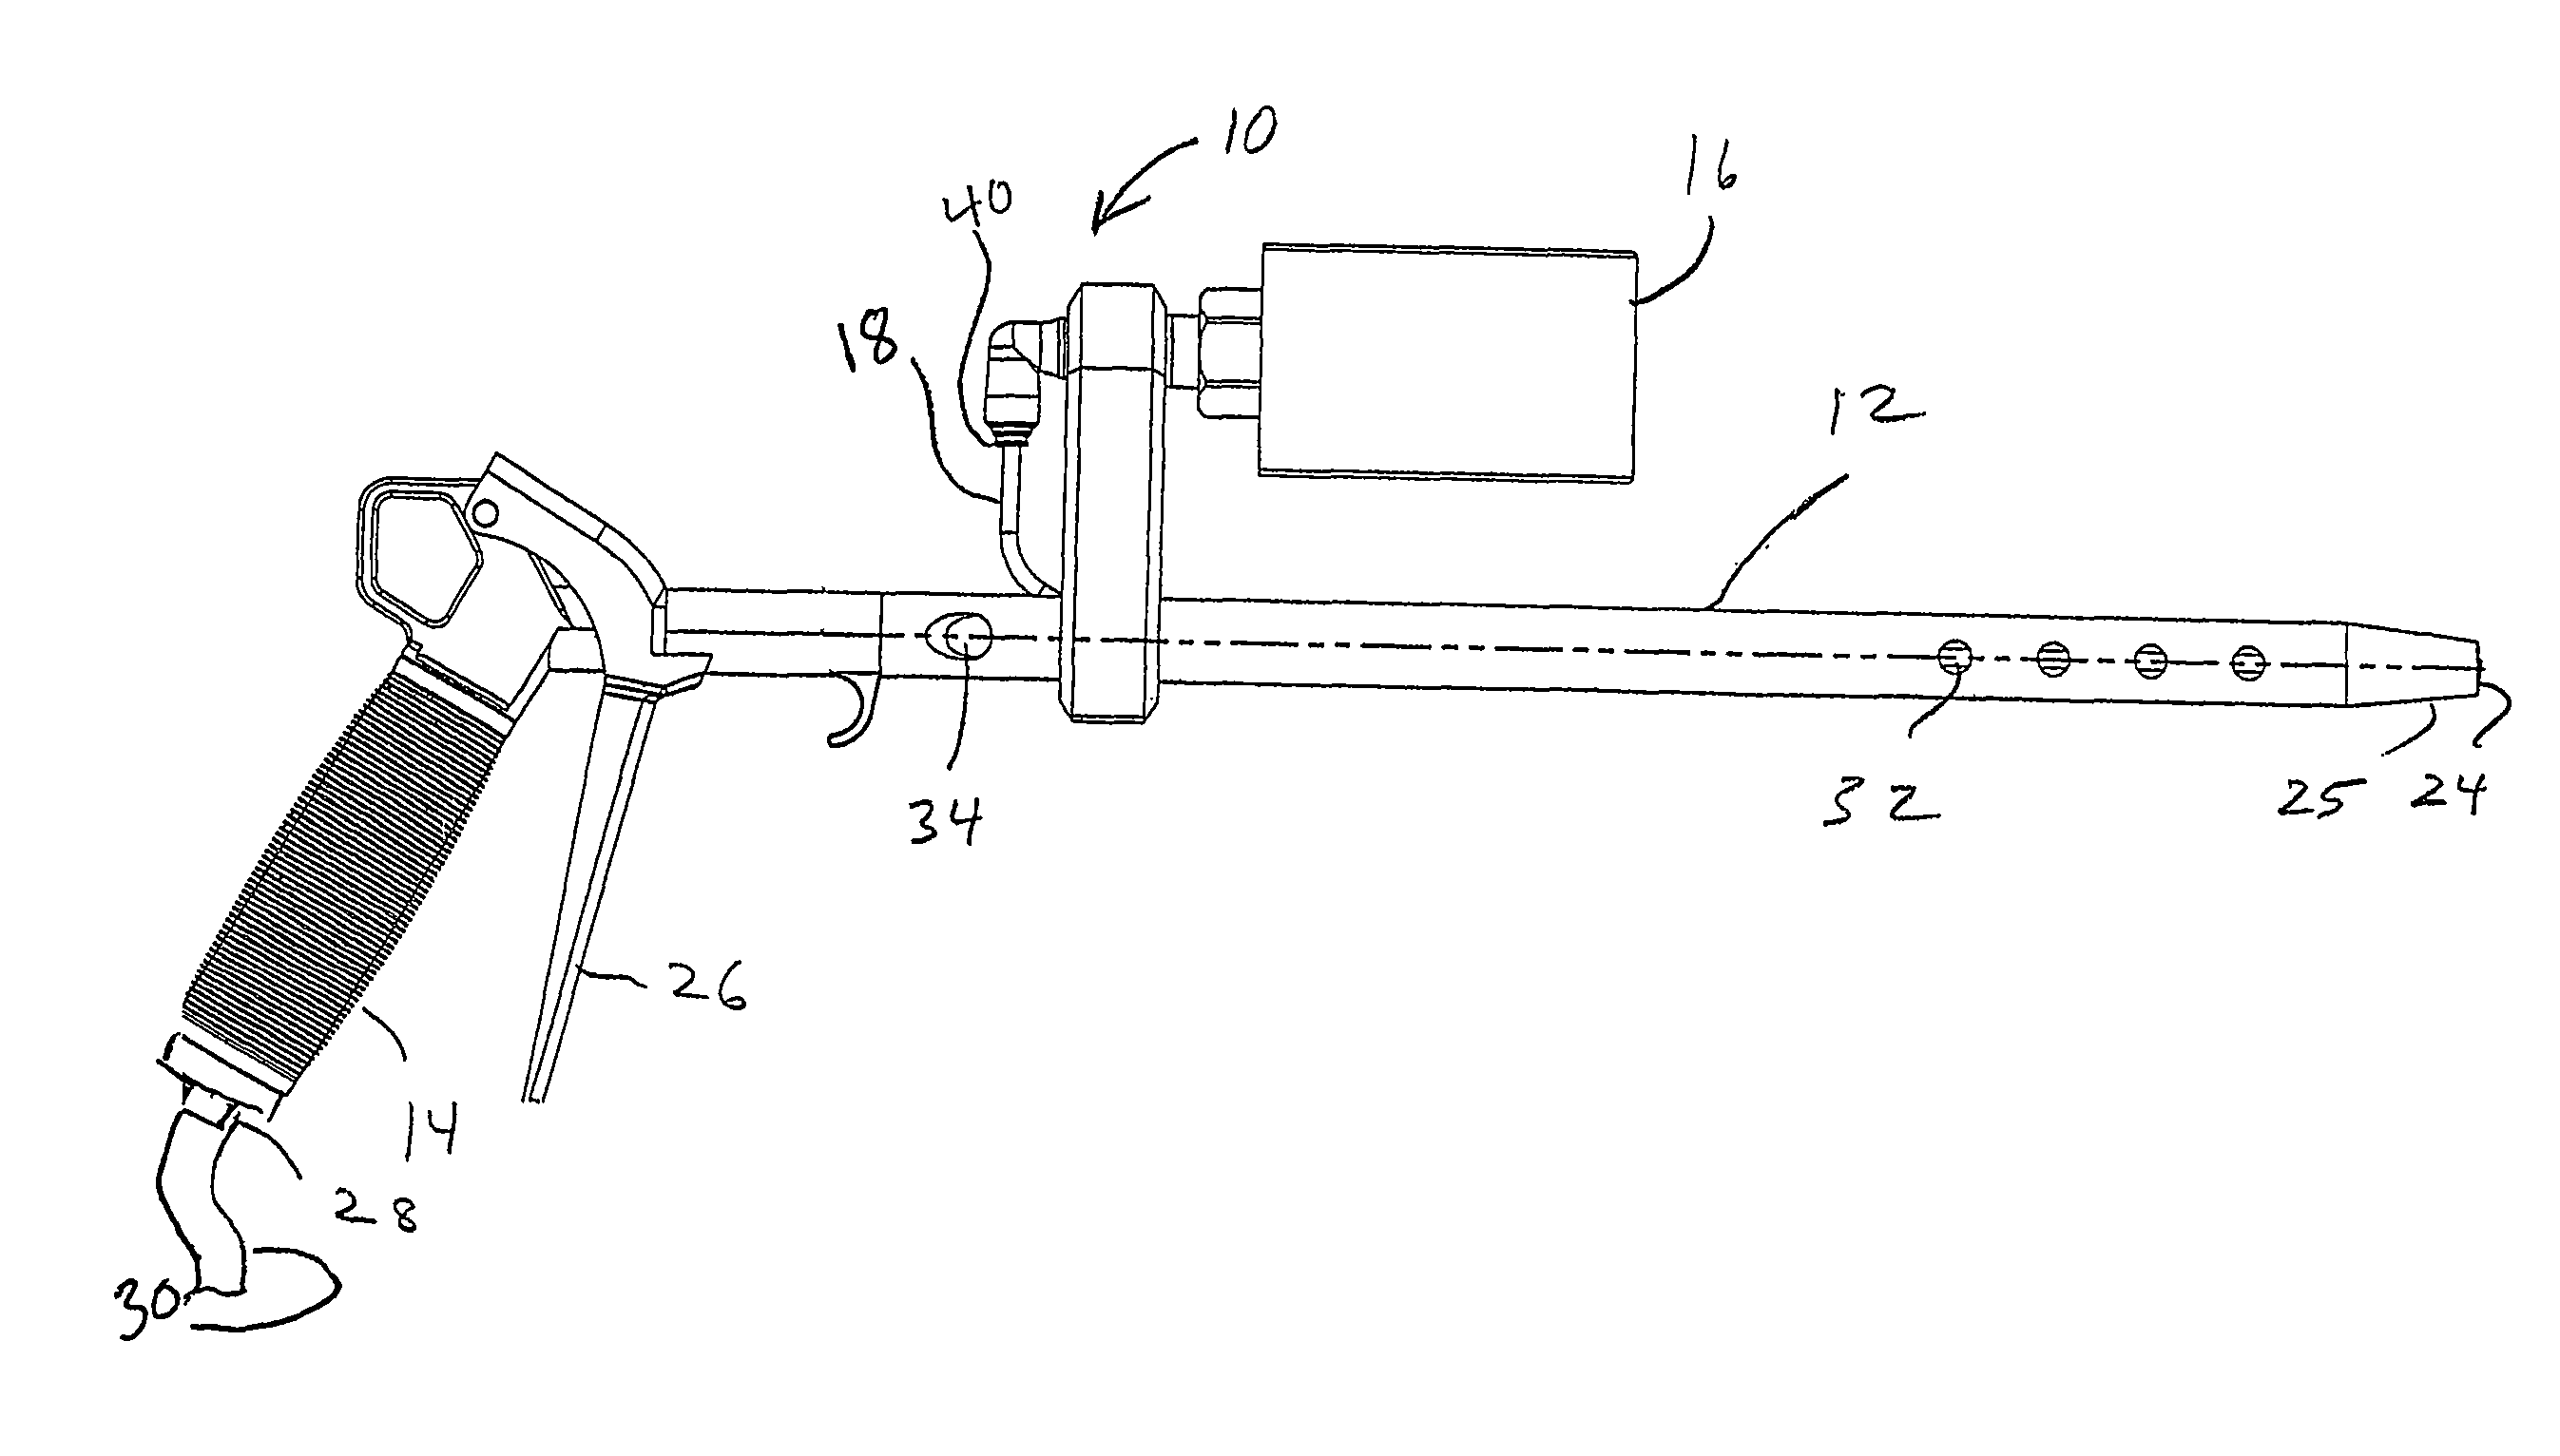 Inflation probe device with measurement of inflation pressure